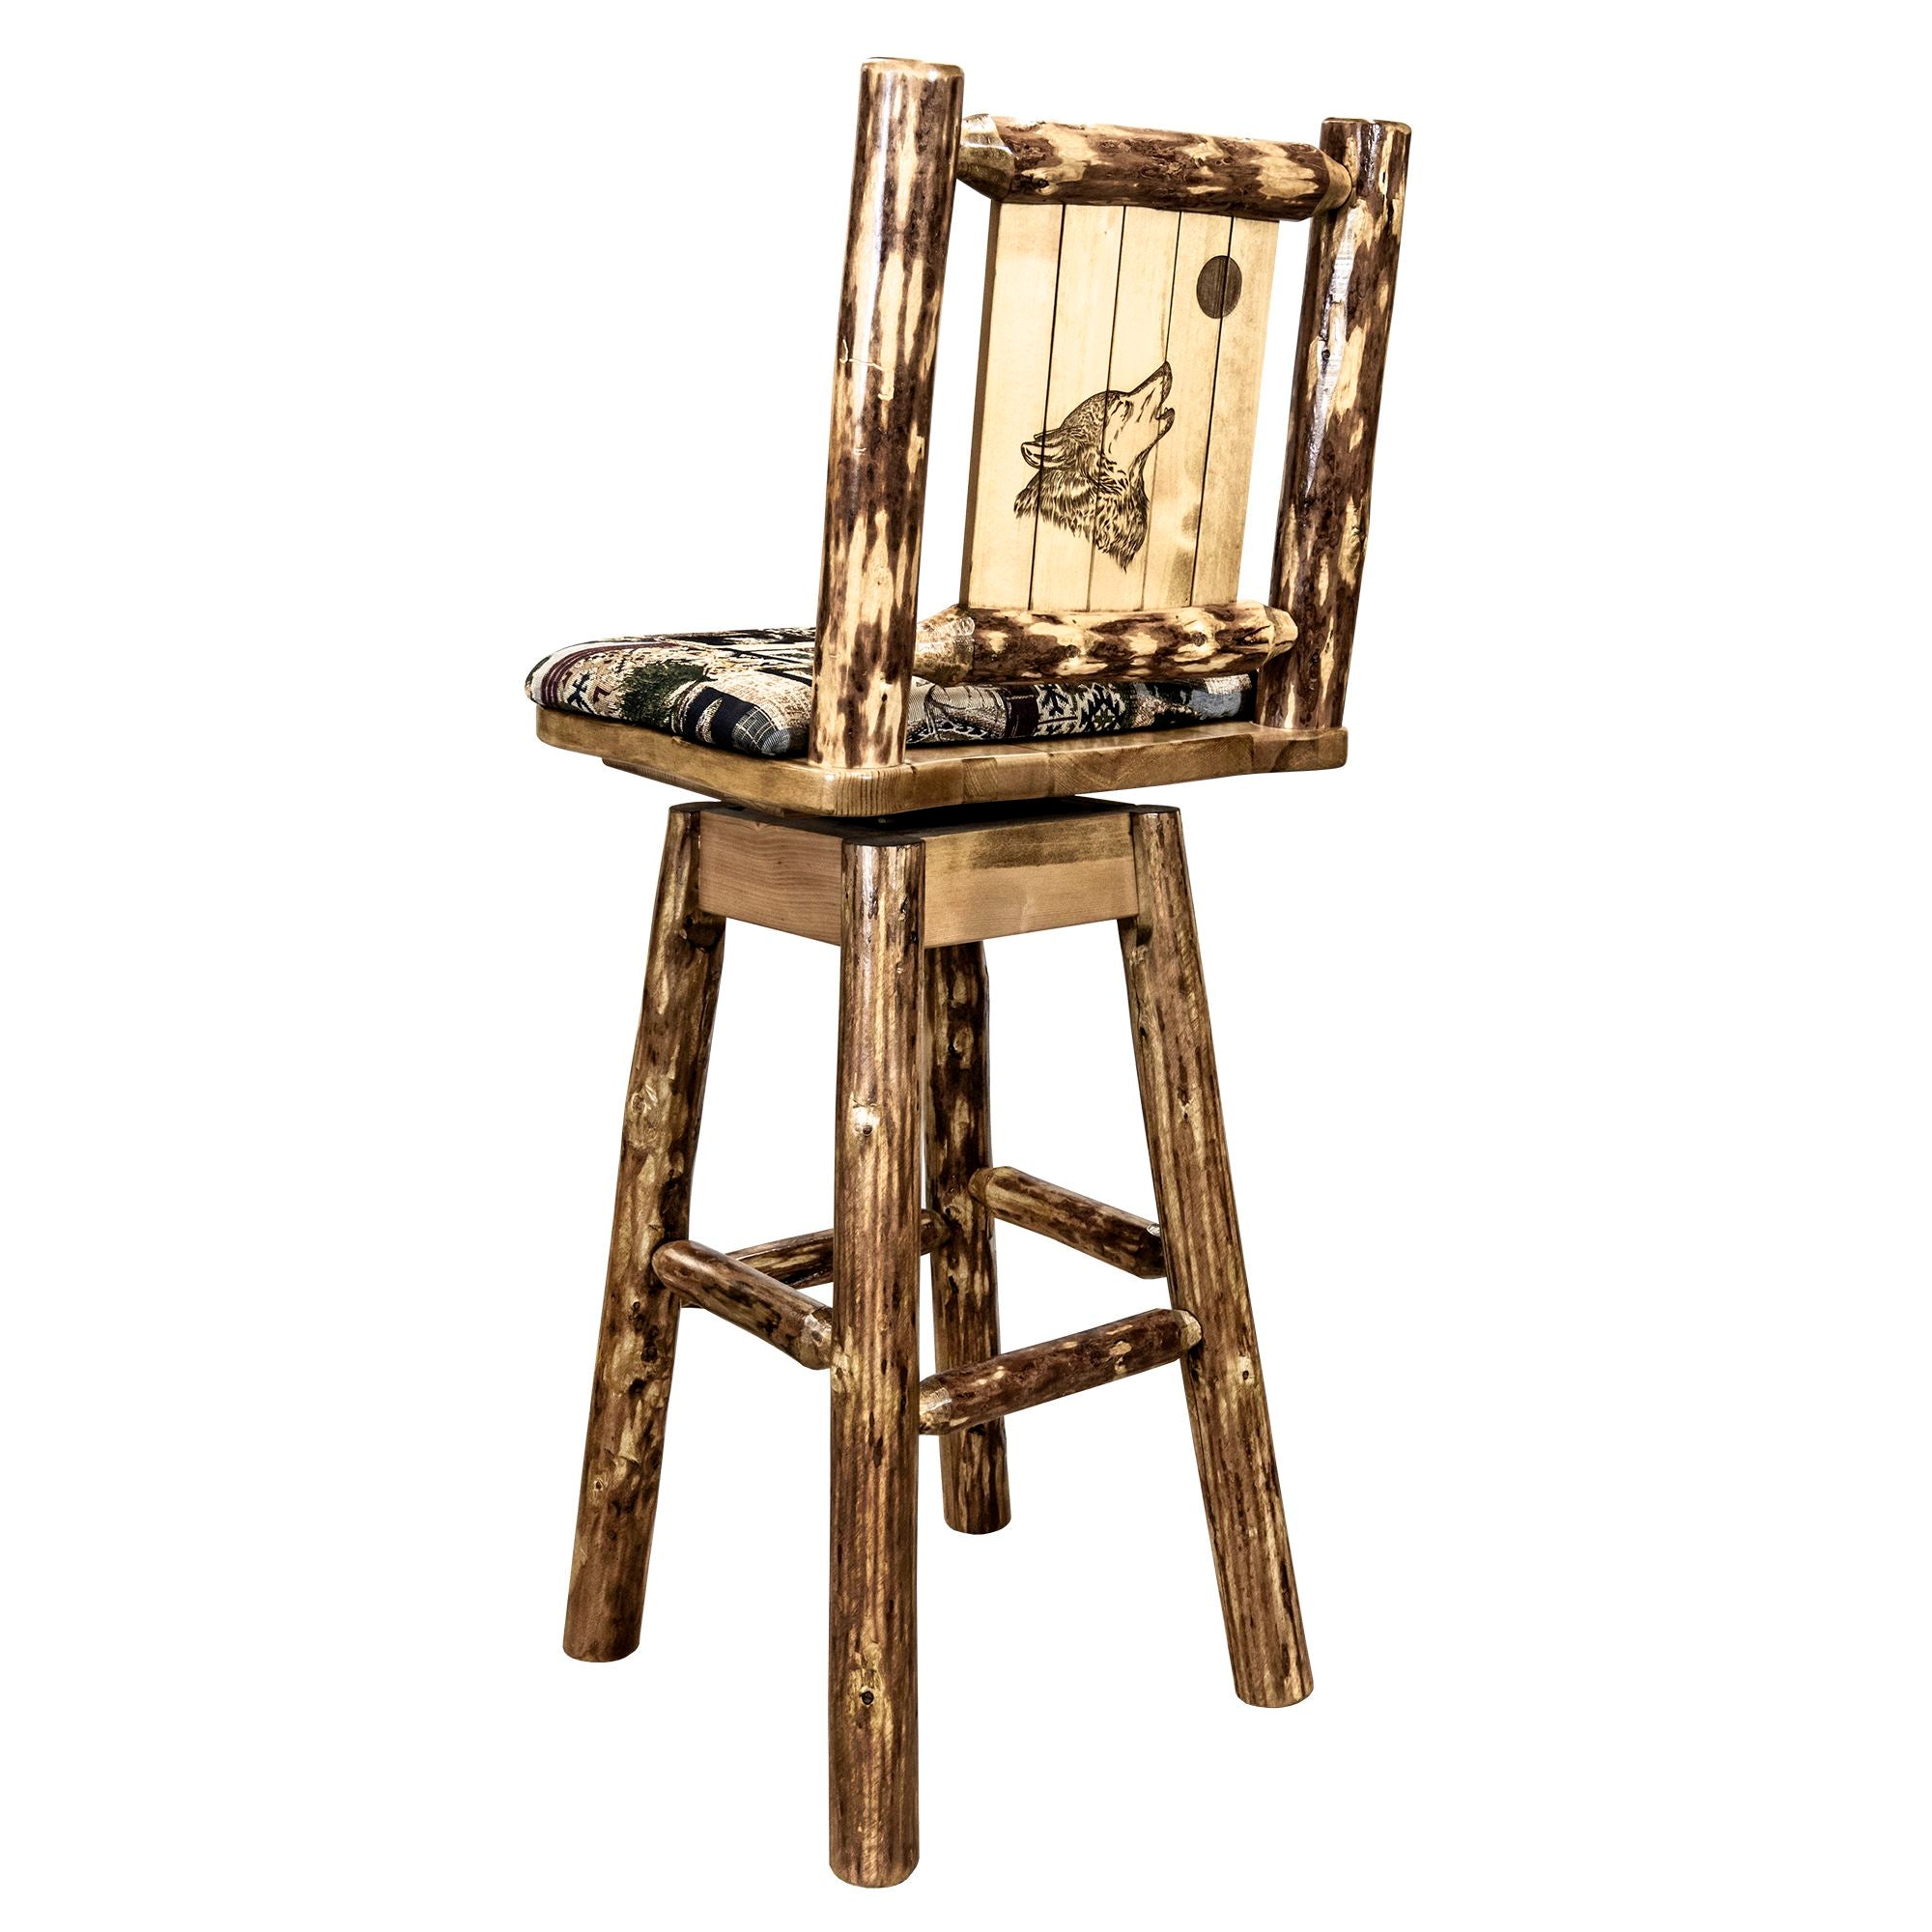 montana glacier country collection barstool with back swivel woodland pattern upholstery with laser engraved wolf design mwgcbswsnrwoodlwolf